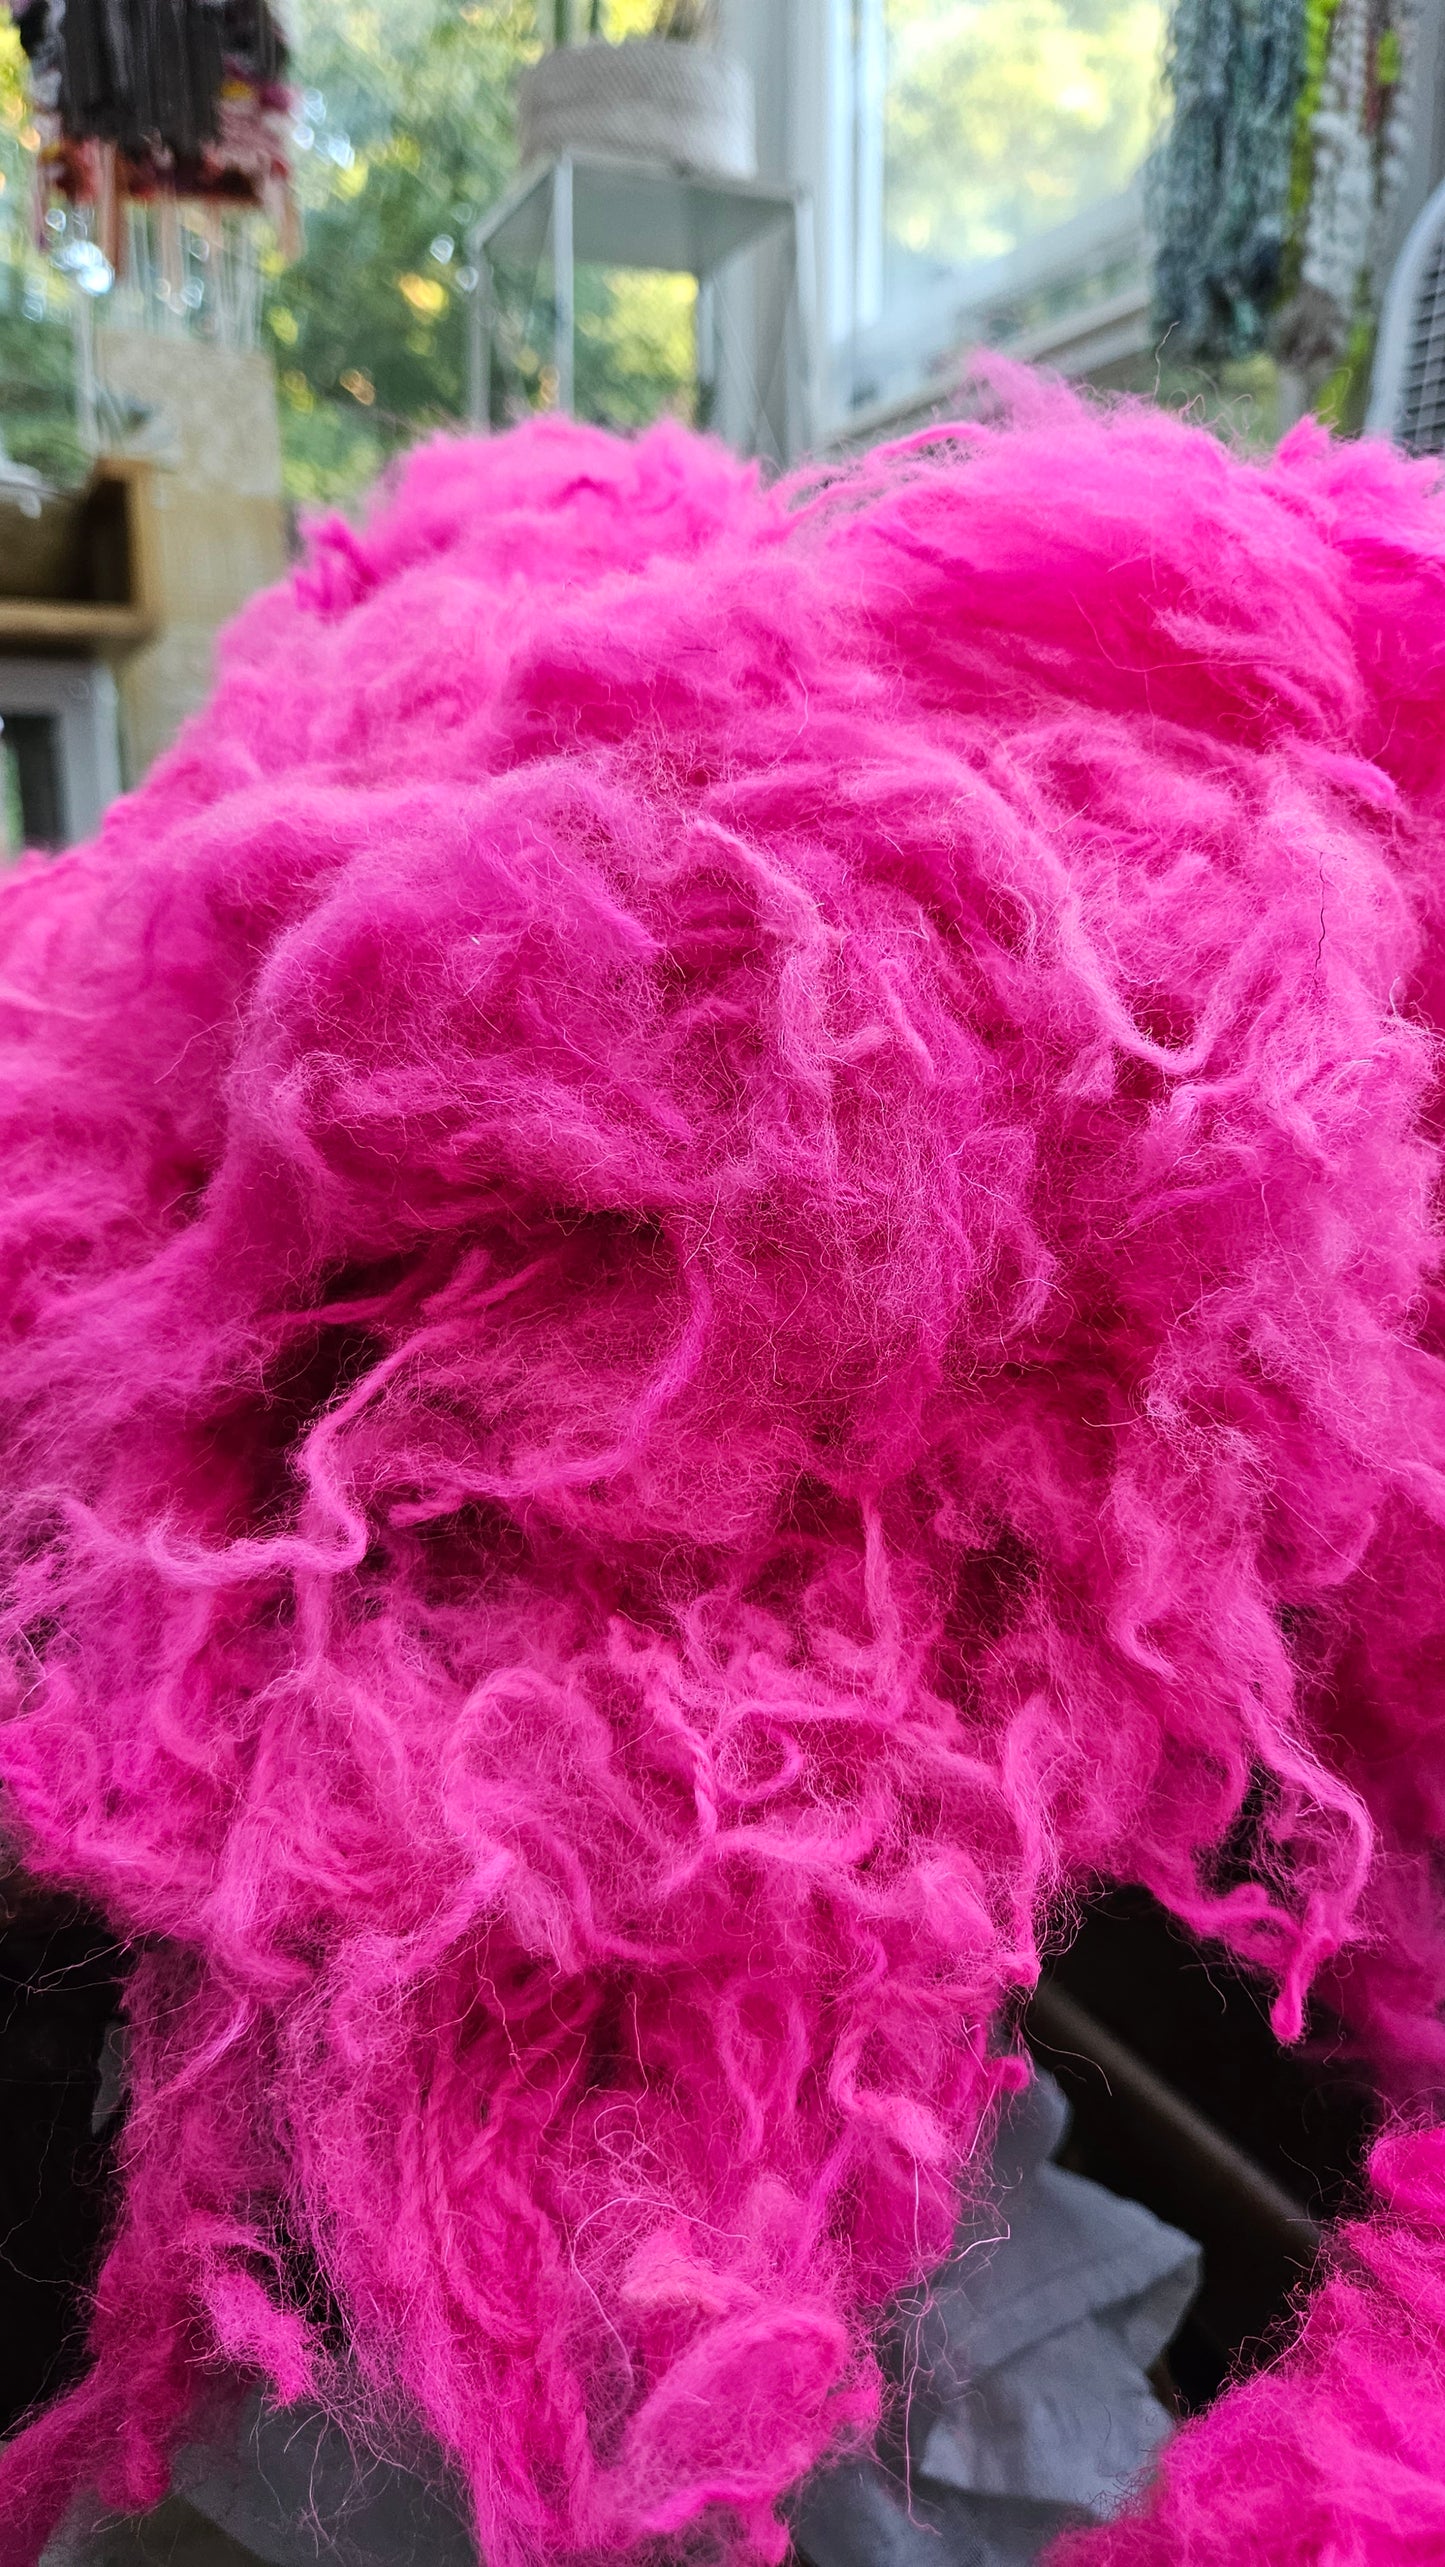 WAGNER Dyed Neon Pink Wool Thread Cloud - 2 ounces